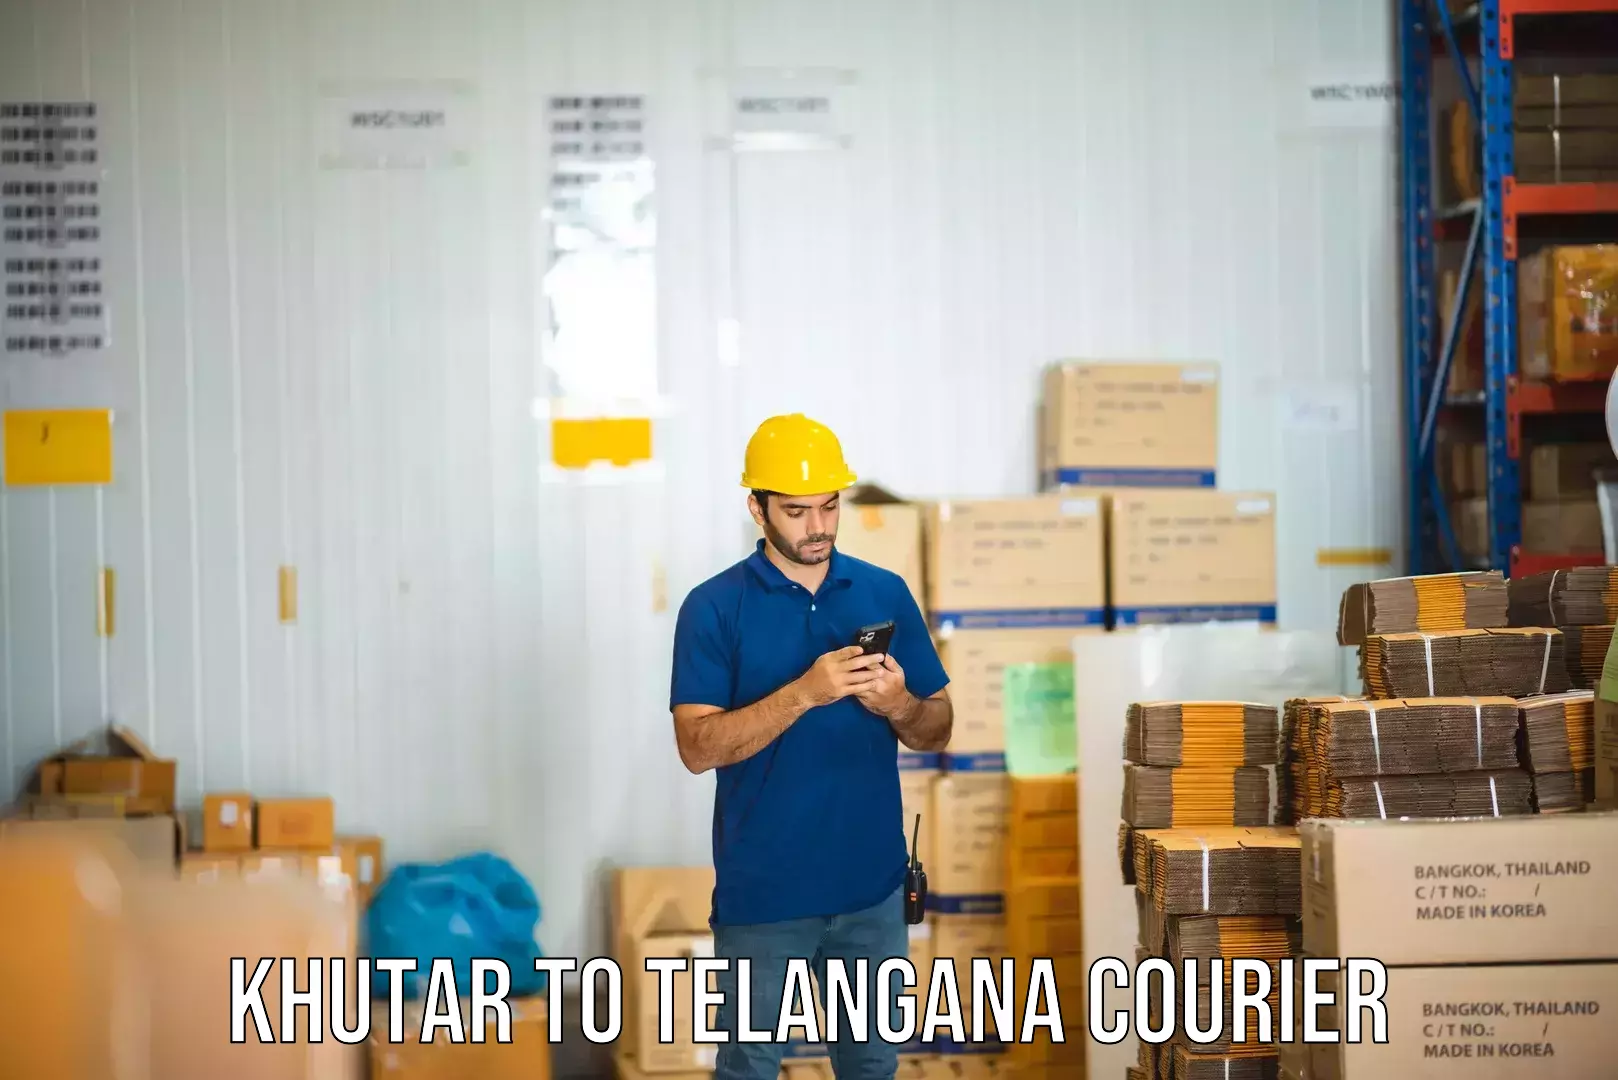 Business shipping needs in Khutar to Netrang